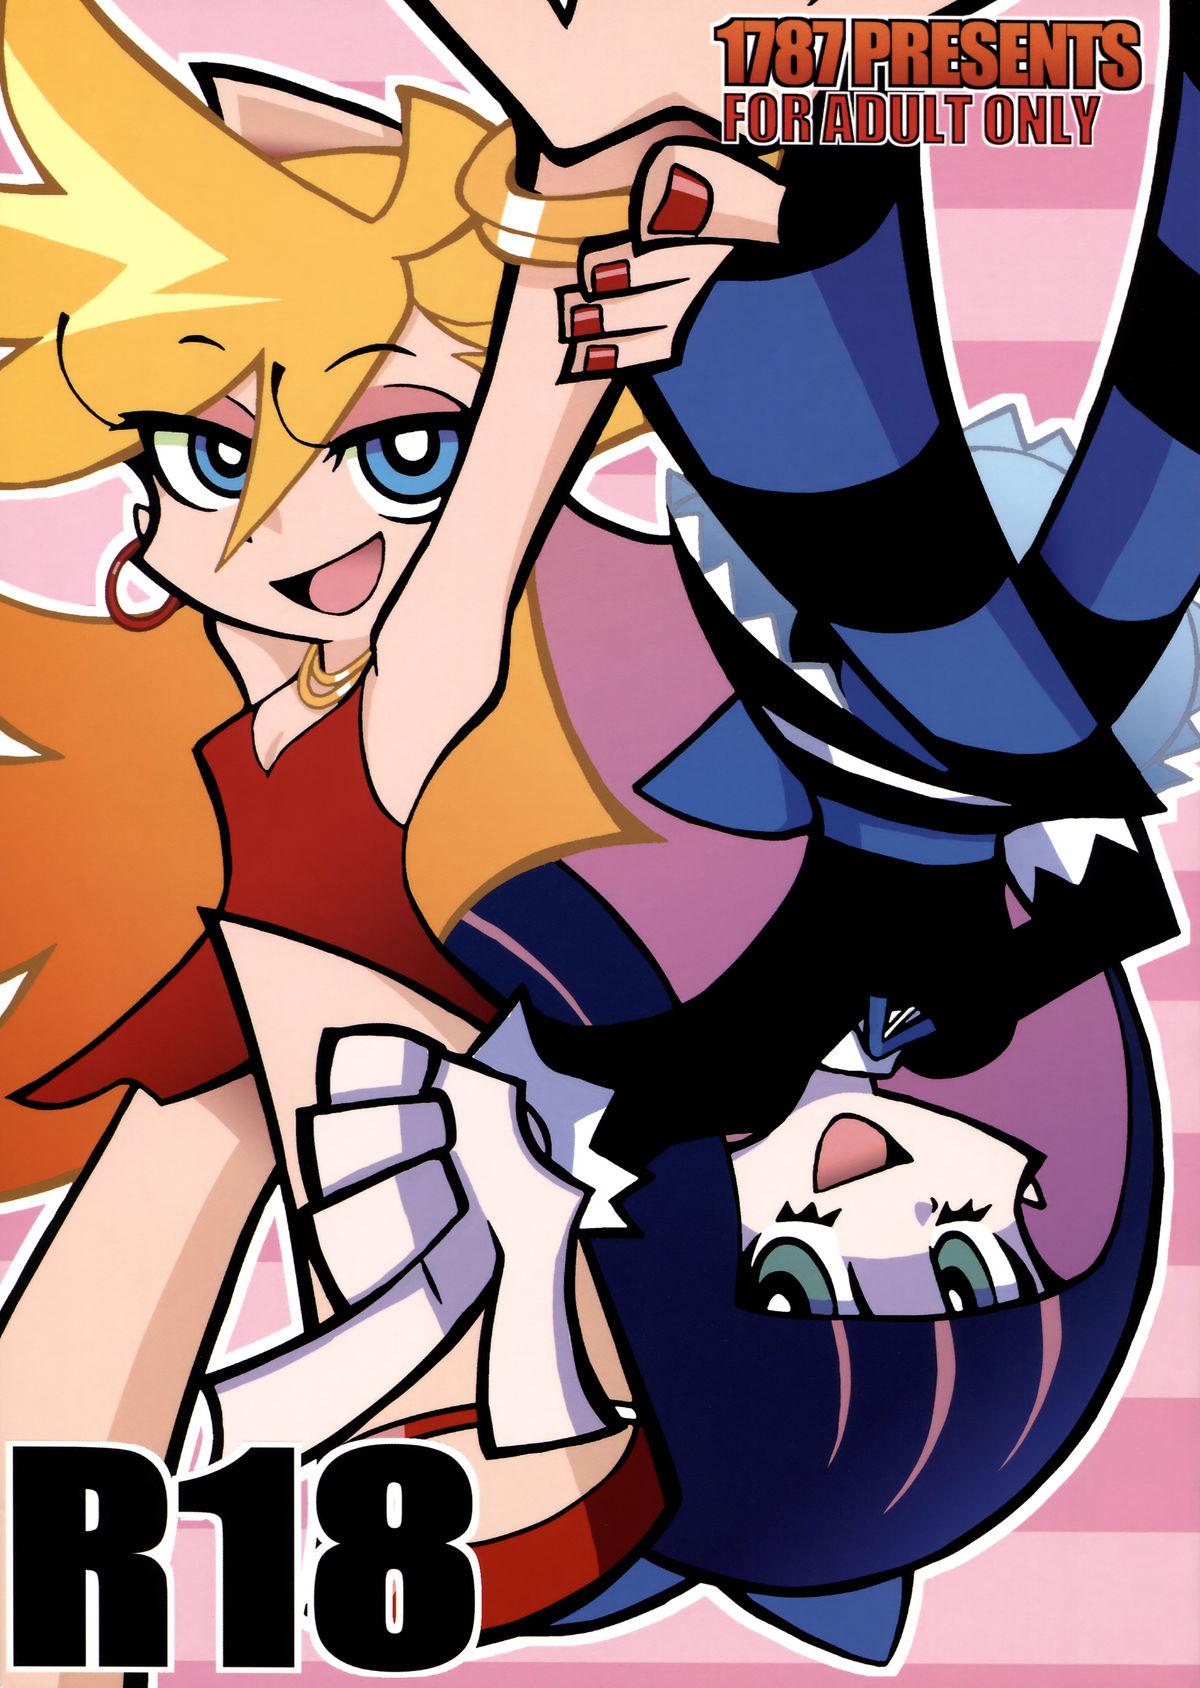 Butthole R18 - Panty and stocking with garterbelt Gorda - Picture 1